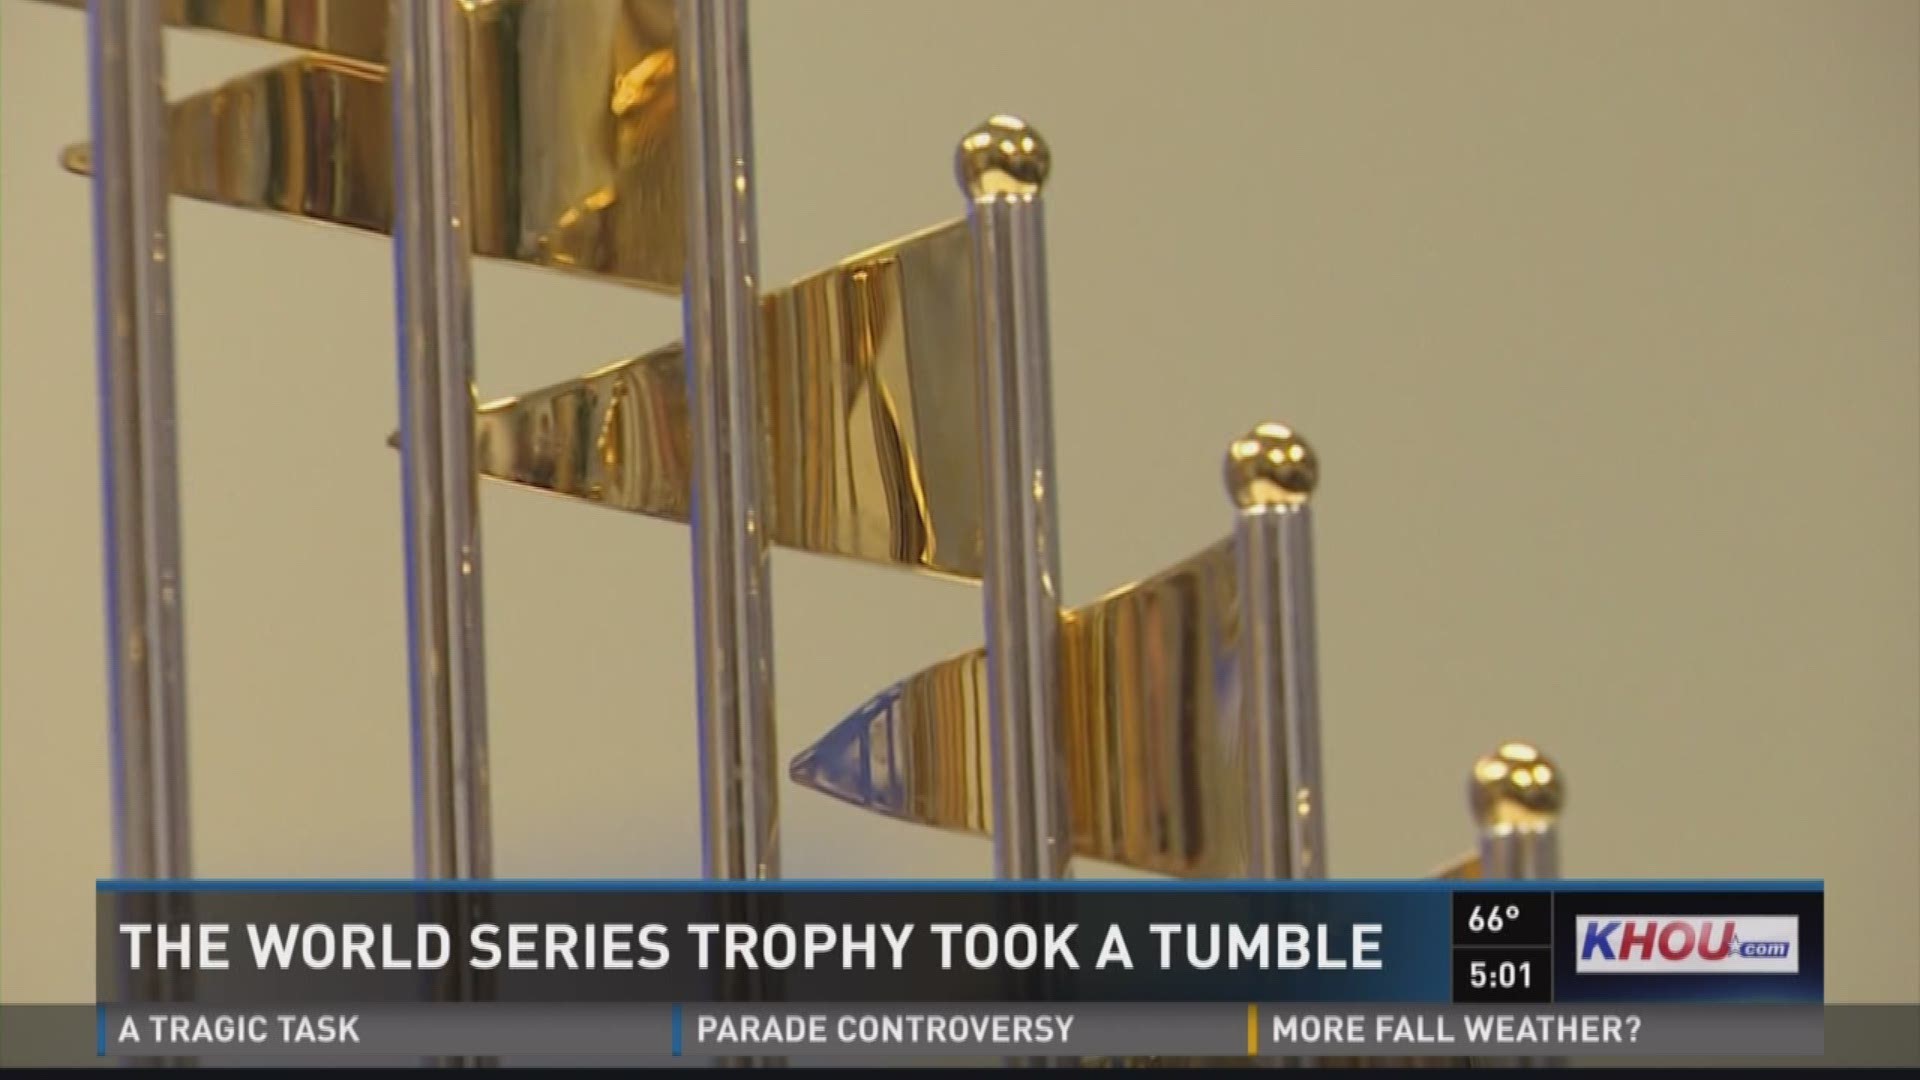 The trophy took a spill and was damaged at an exclusive men's-only event at the Houston Museum of Fine Arts Thursday night.